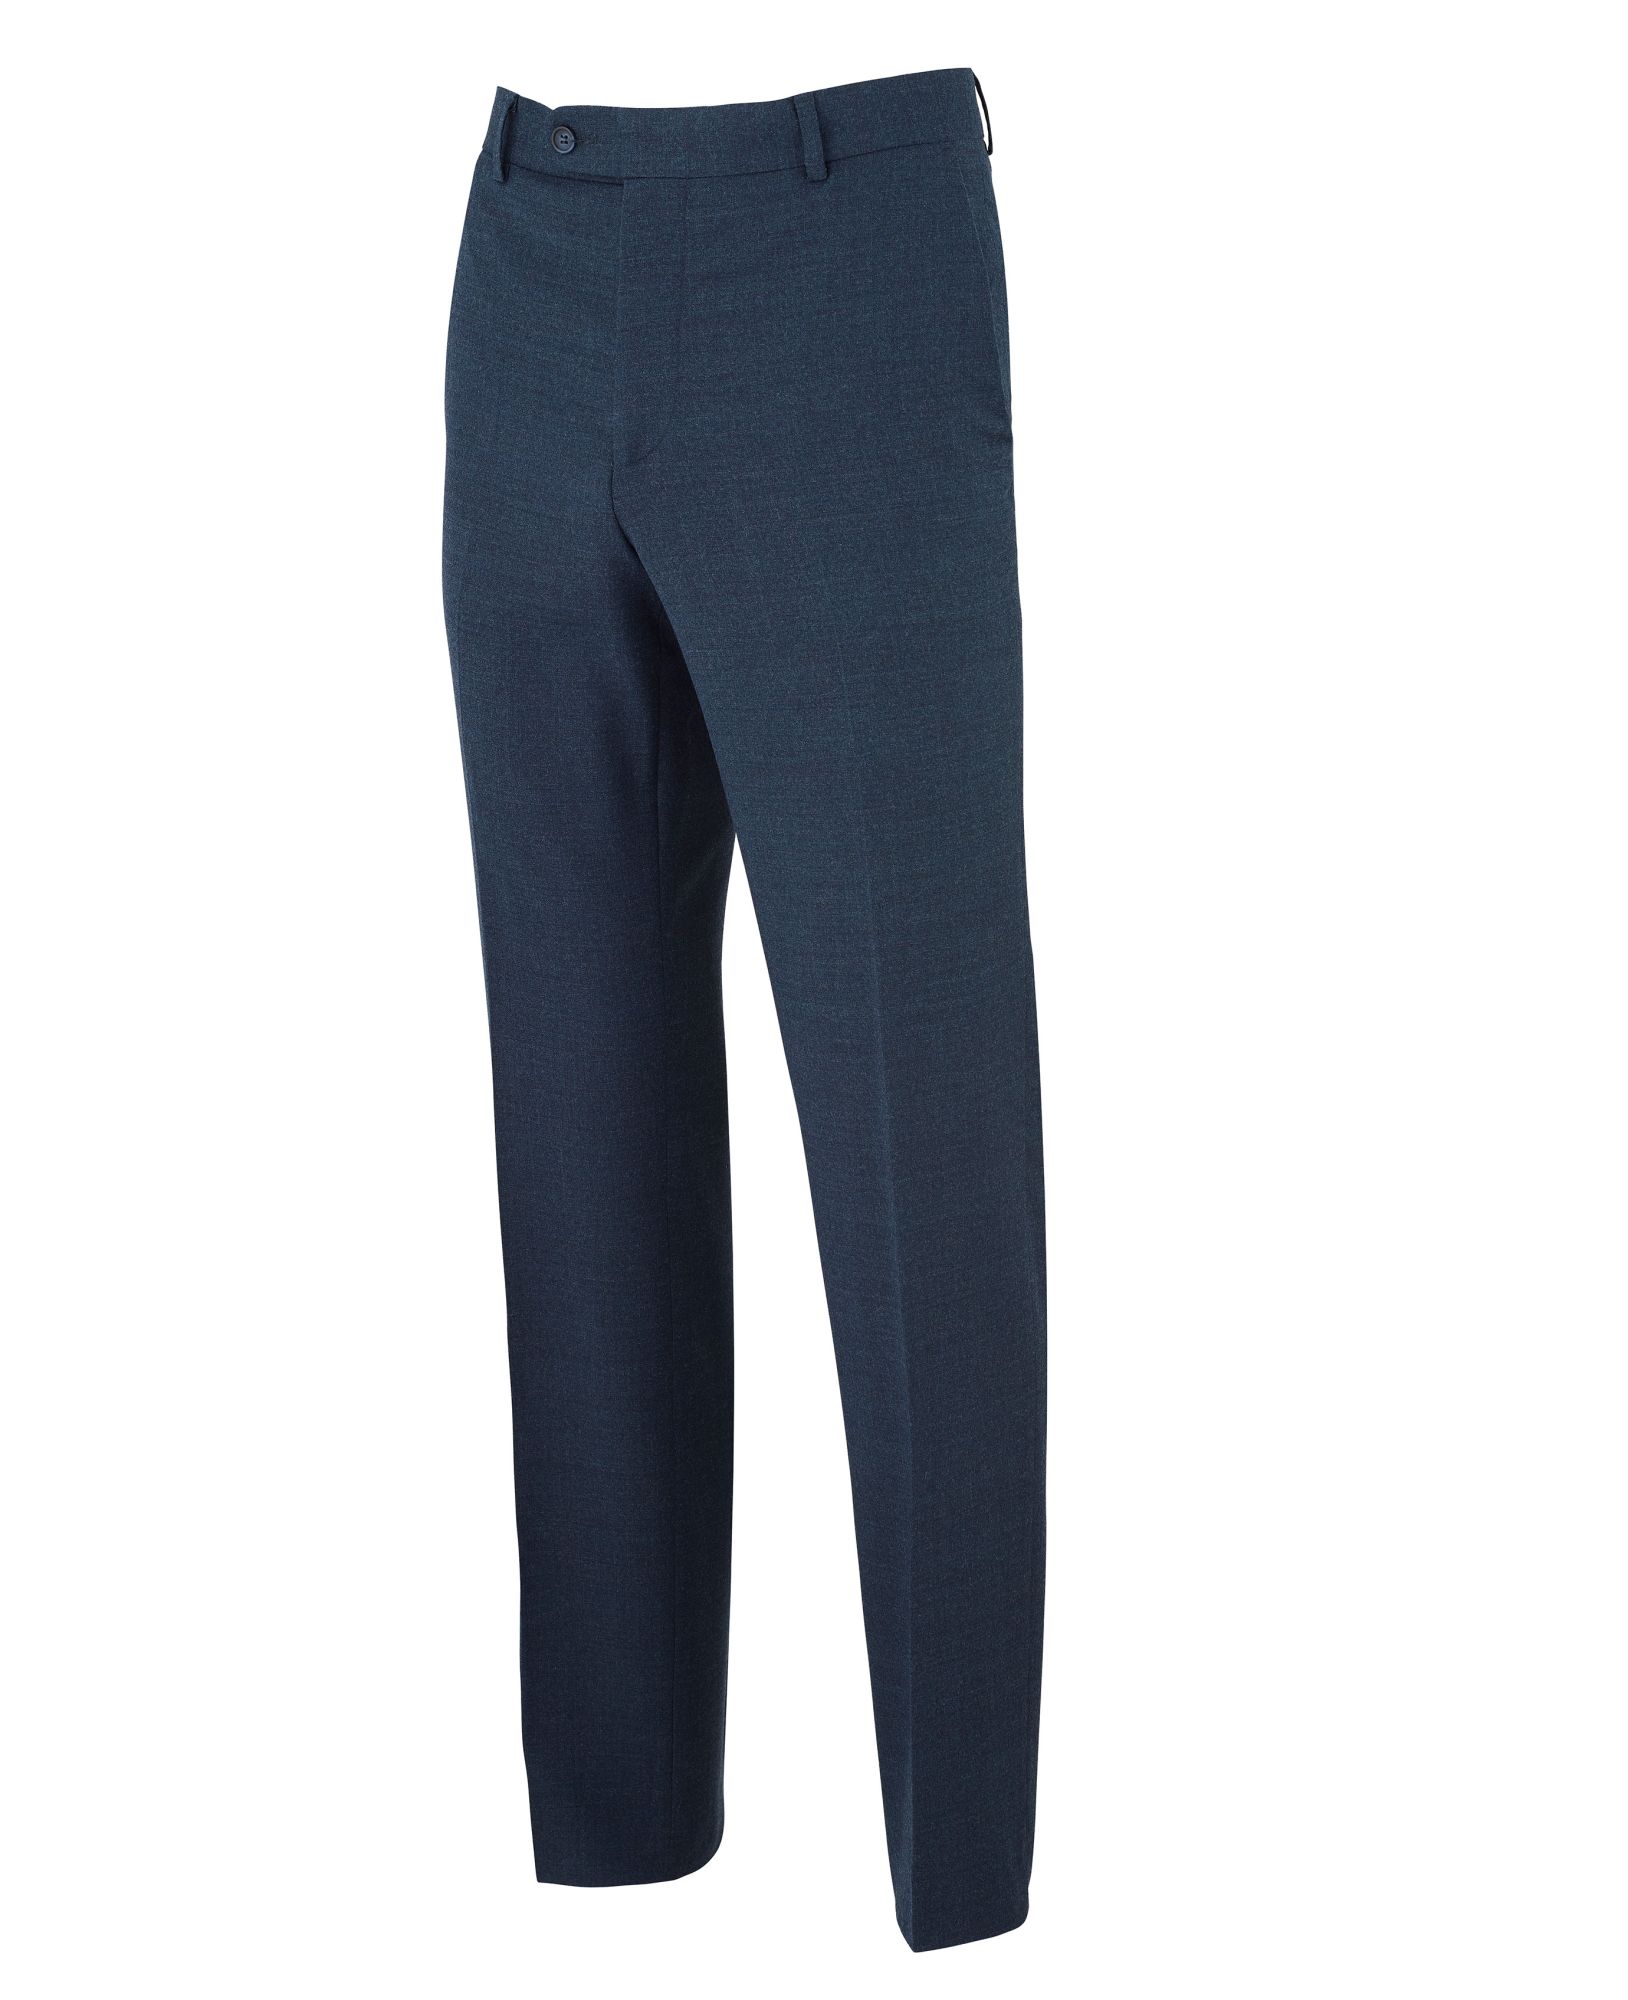 Navy Wool-Blend Tailored Suit Trousers 44